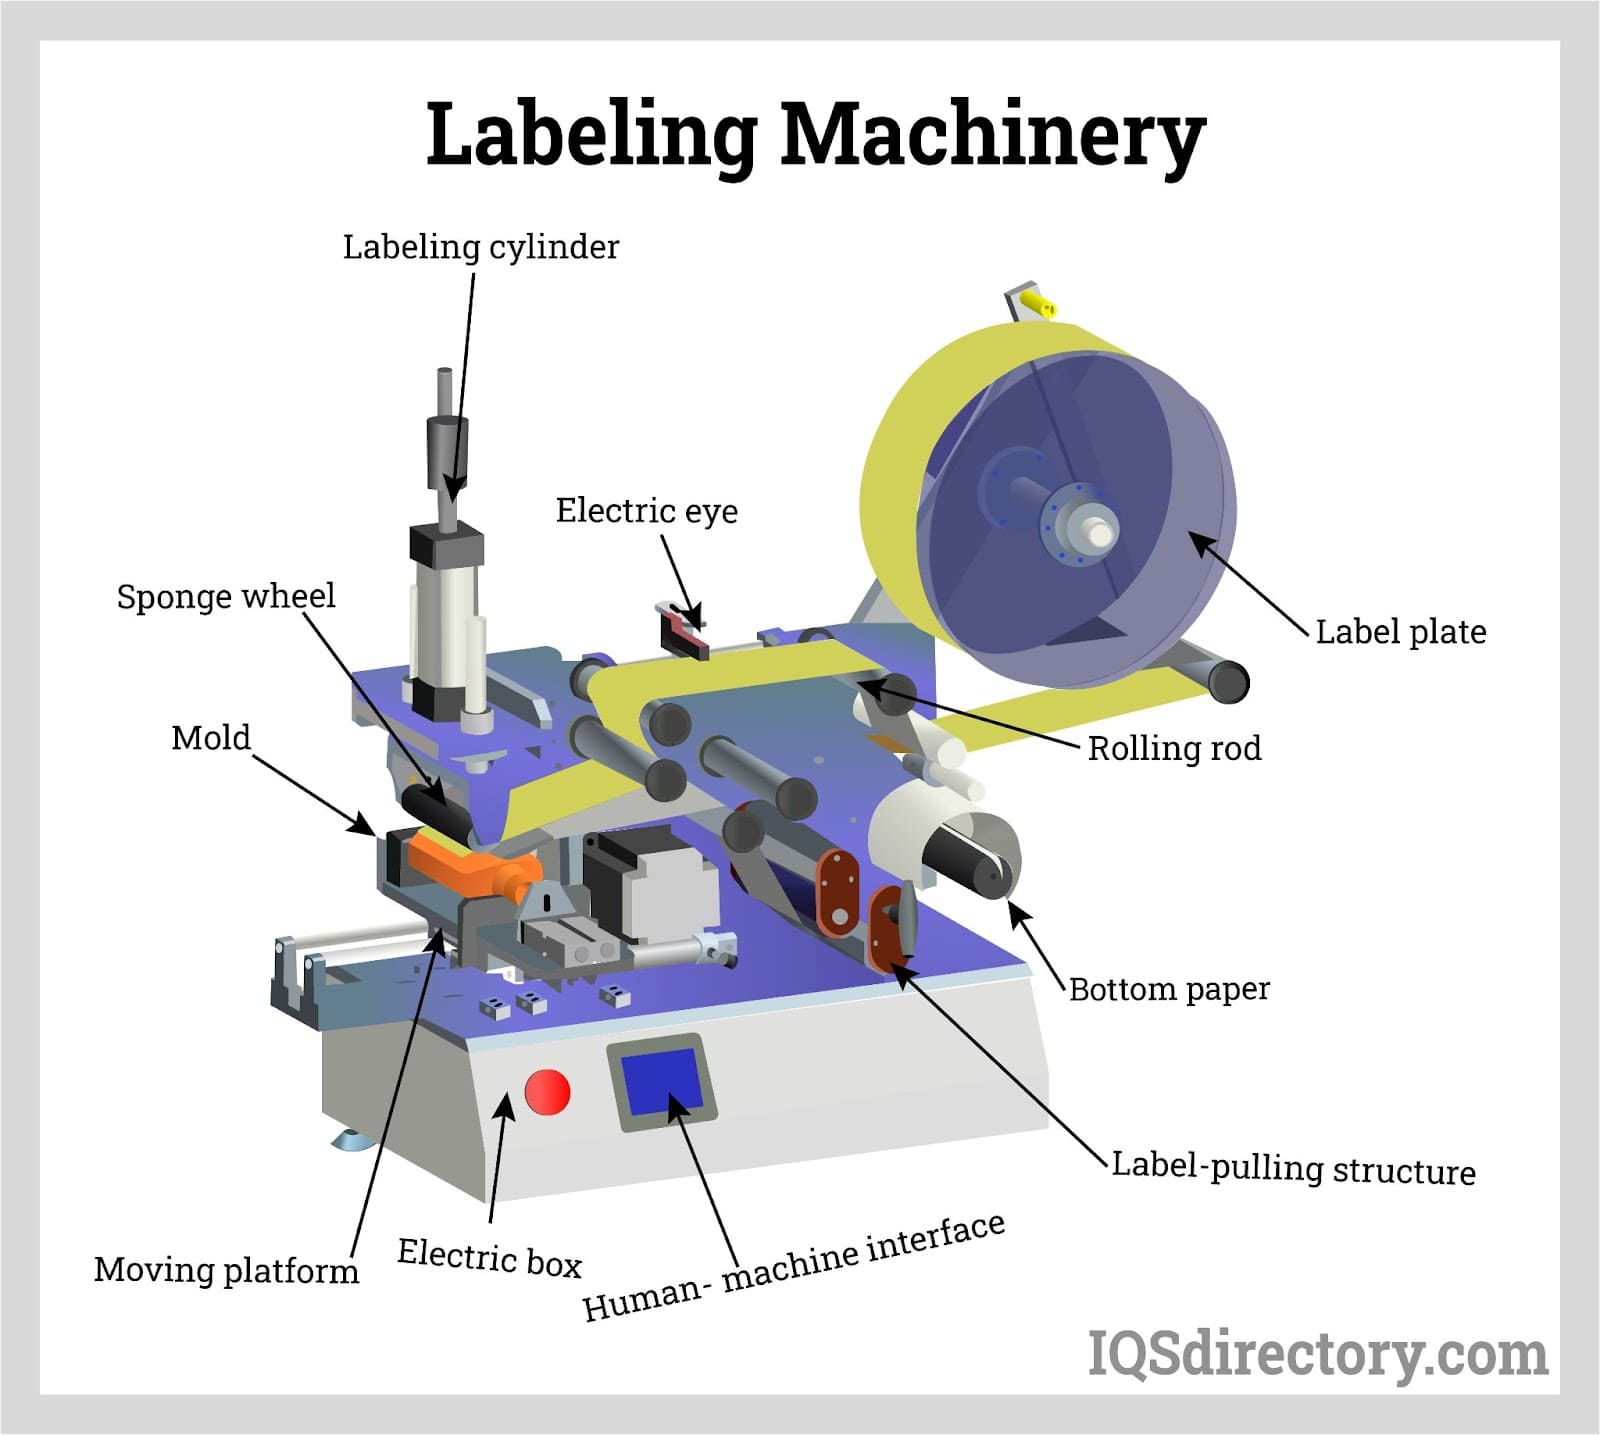 Labeling Machinery: Types, Uses, Features and Benefits